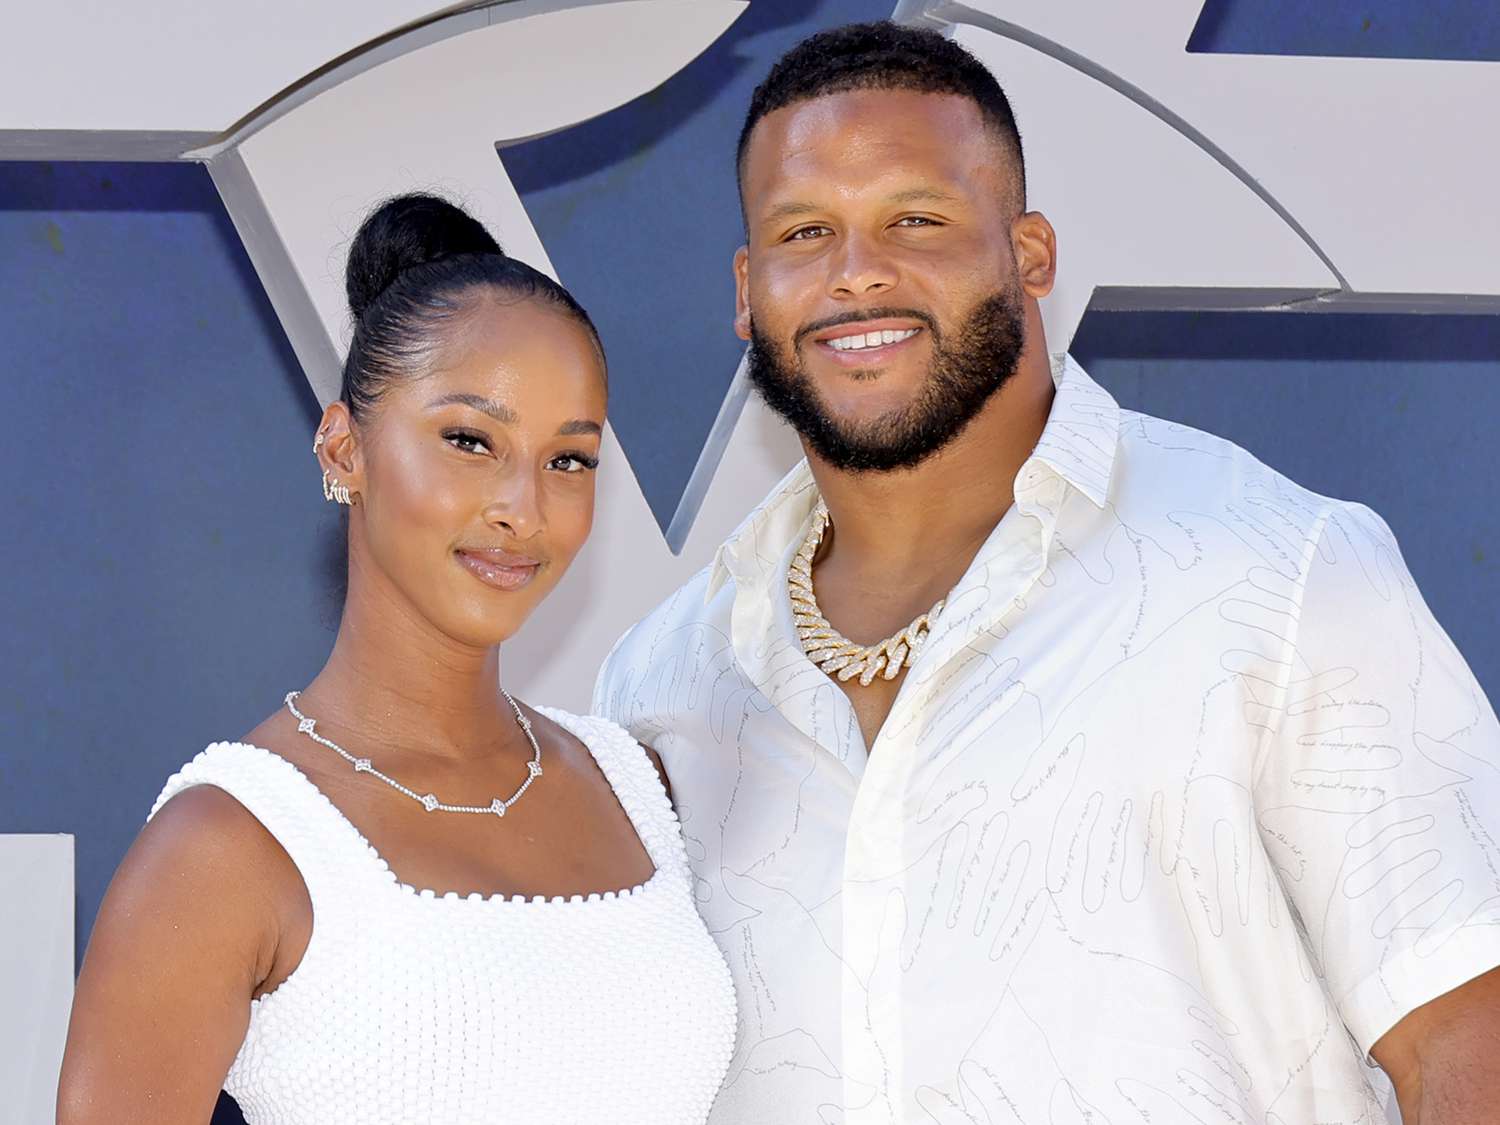 Erica Donald: The Wife, Marketing Manager, and Fitness Enthusiast of Aaron Donald